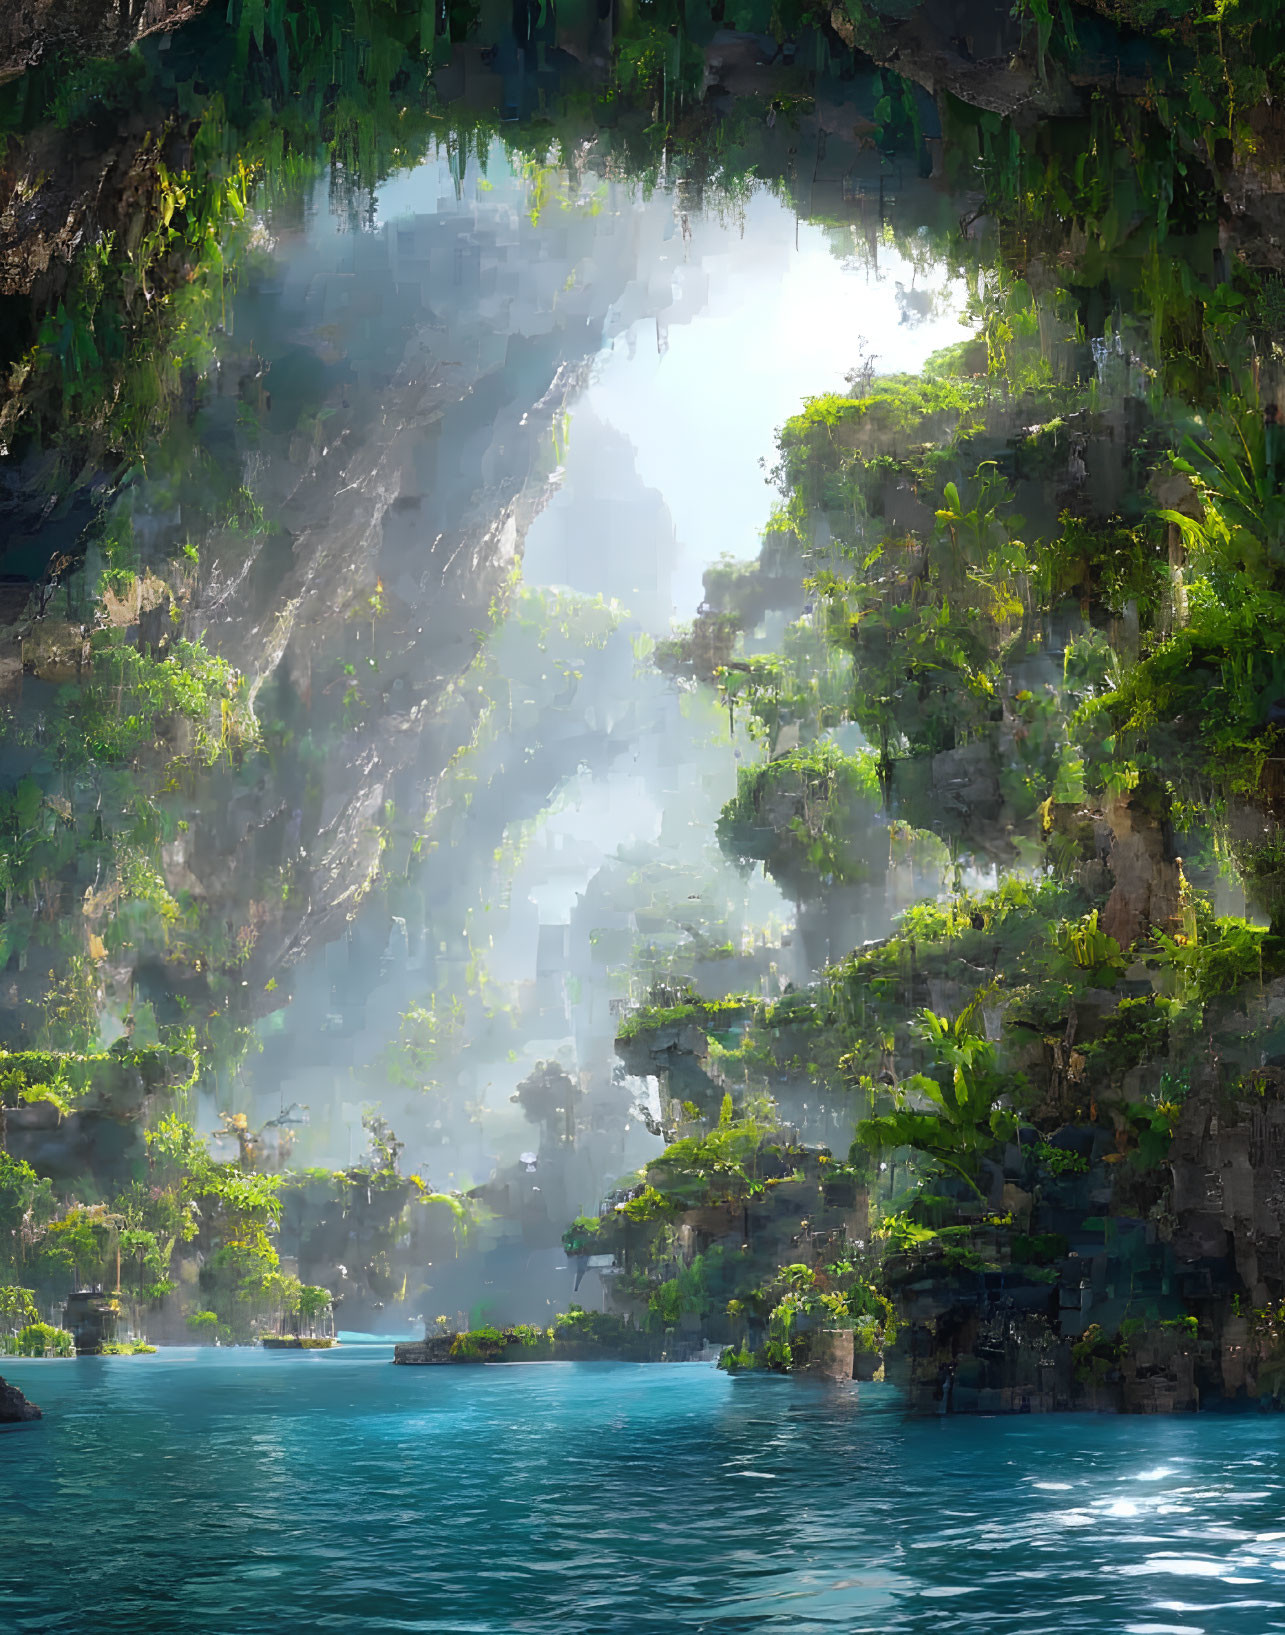 Tranquil cave opening with sunlight, lush greenery, and blue water